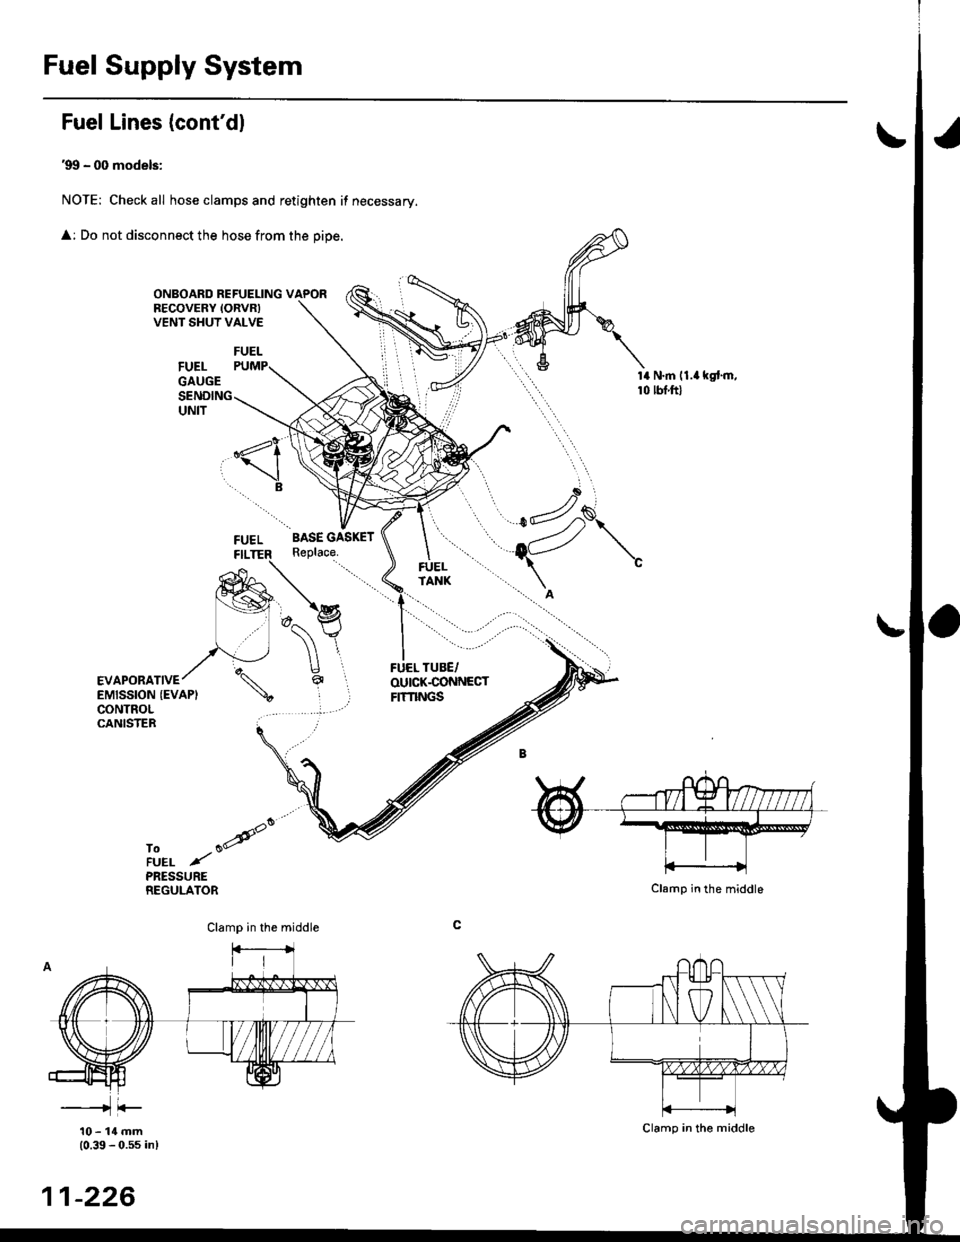 HONDA CIVIC 1996 6.G Workshop Manual Fuel Supply System
Fuel Lines (contdl
.99 - 00 models:
NOTE: Check all hose clamps and retighten if necessary.
 : Do not disconnect the hose from the pipe.
ONBOARD REFUELING VAPORBECOVERY IORVRIVENT 